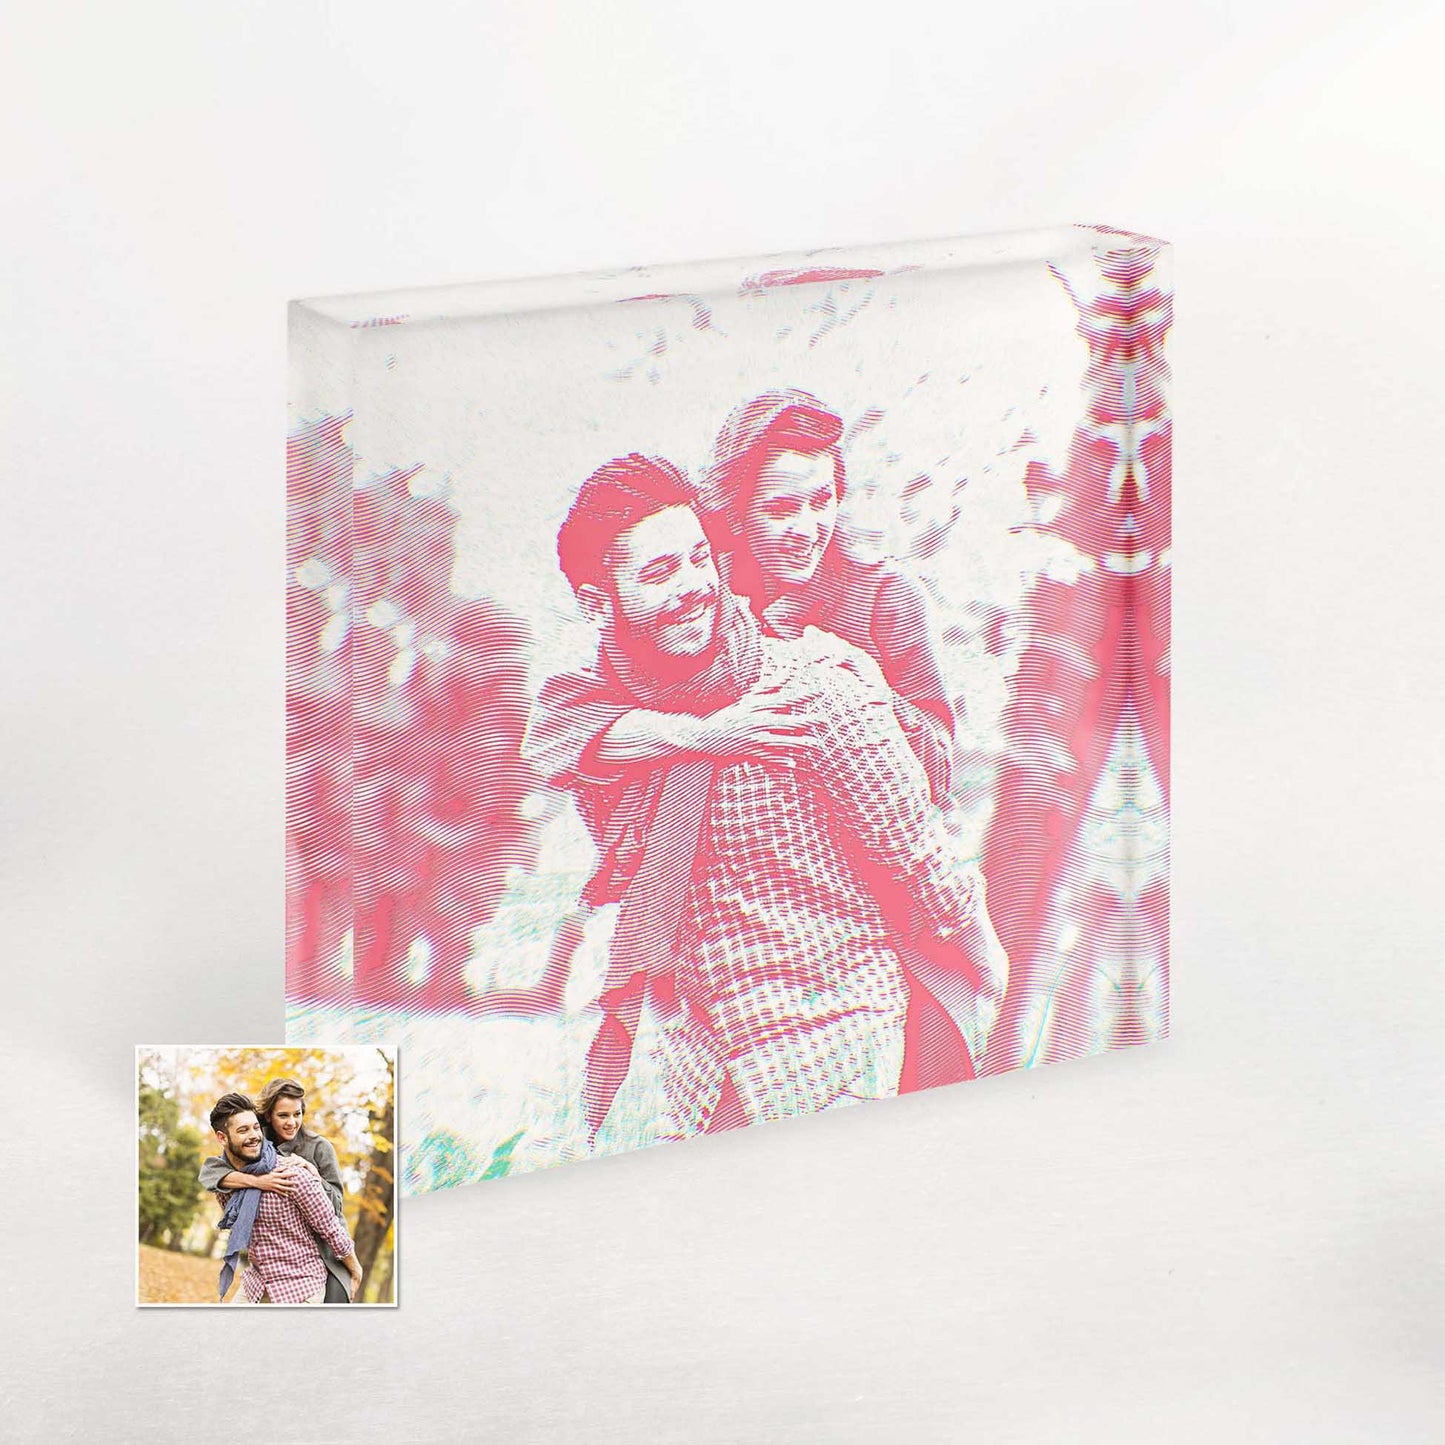 Embrace the beauty of simplicity with our Personalised Pink Engraving Acrylic Block Photo. Its minimalist aesthetic adds a touch of elegance and excitement, making it an ideal novelty gift for anniversaries, birthdays